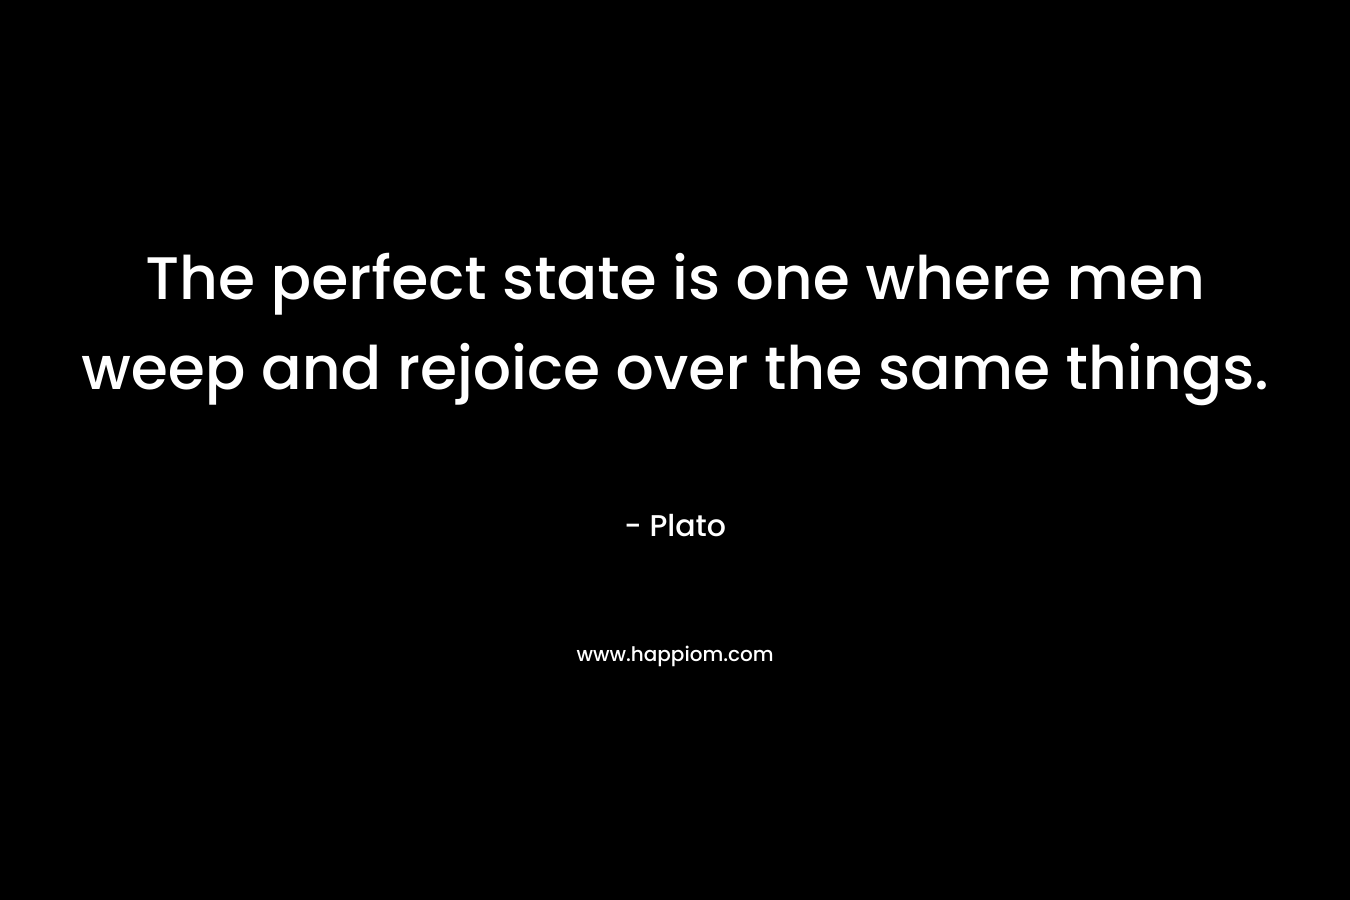 The perfect state is one where men weep and rejoice over the same things.